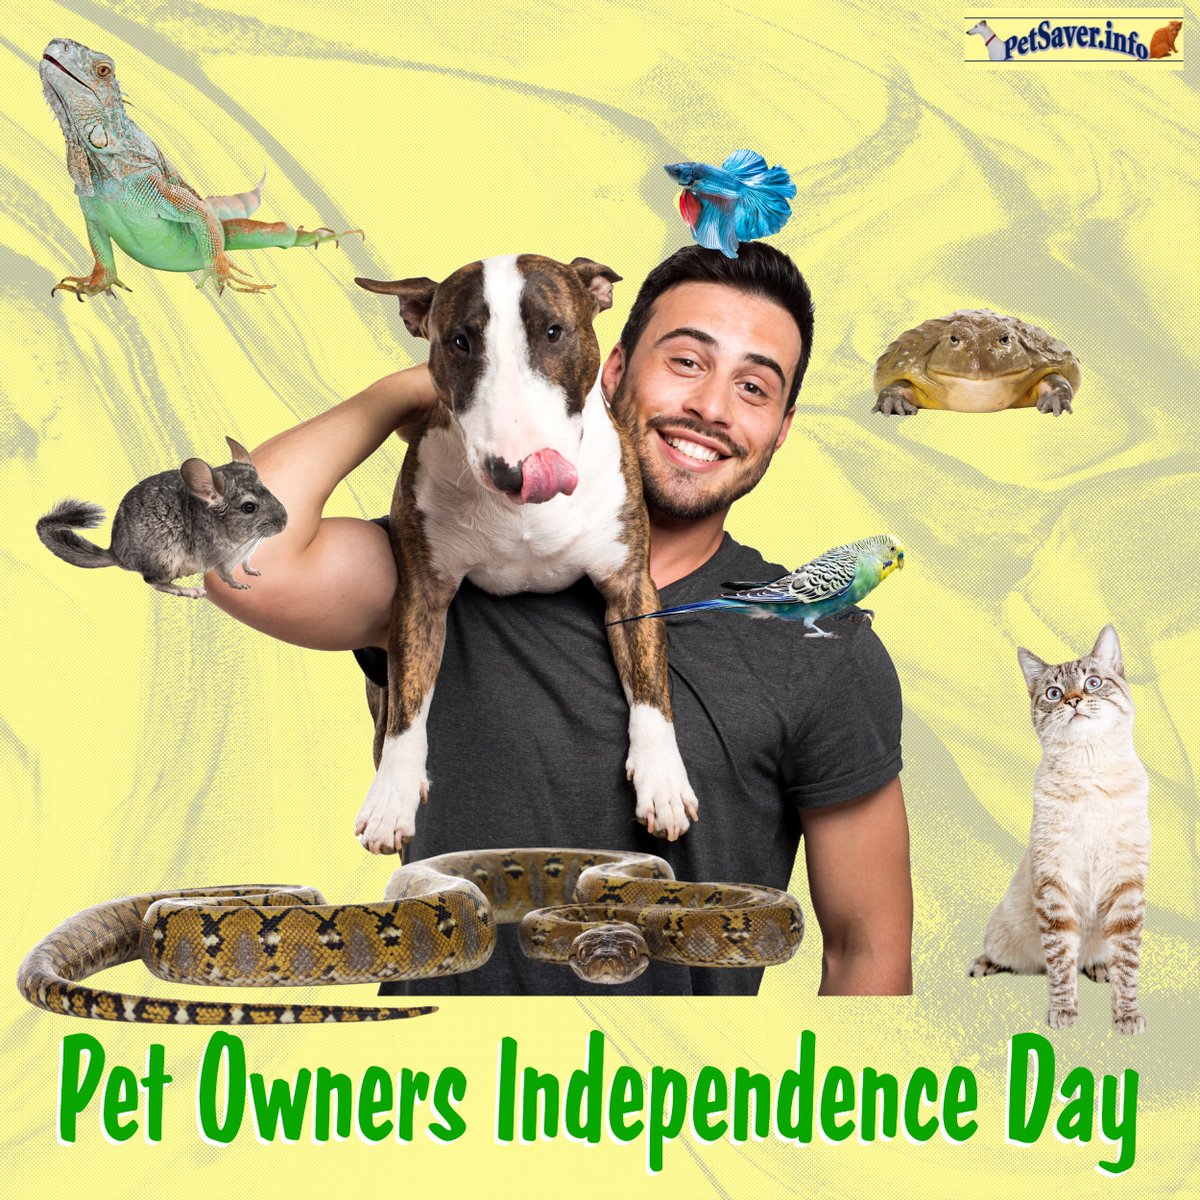 Today is Pet Owners Independence Day! Celebrate the day with a walk with your dog, a couple chin scratches with your cat, an extra shake of food for the fish, some special bugs for your lizard, etc. #petsaver #welovepets #PetOwnersIndependenceDay #pets petsaver.info